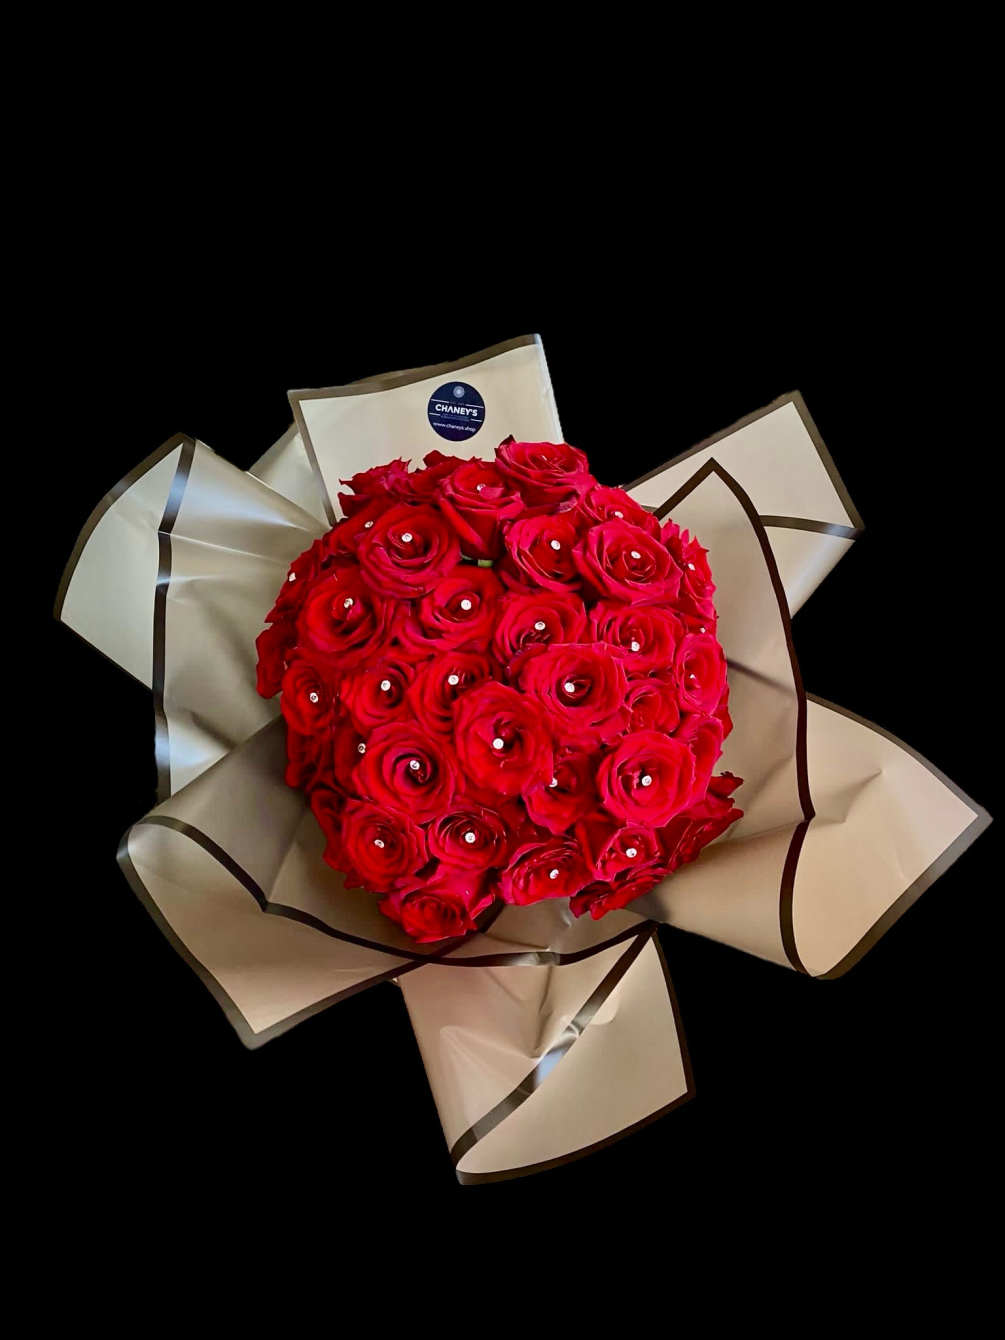 Unique and luxury wrap design with 3 dozen red roses. Each hand